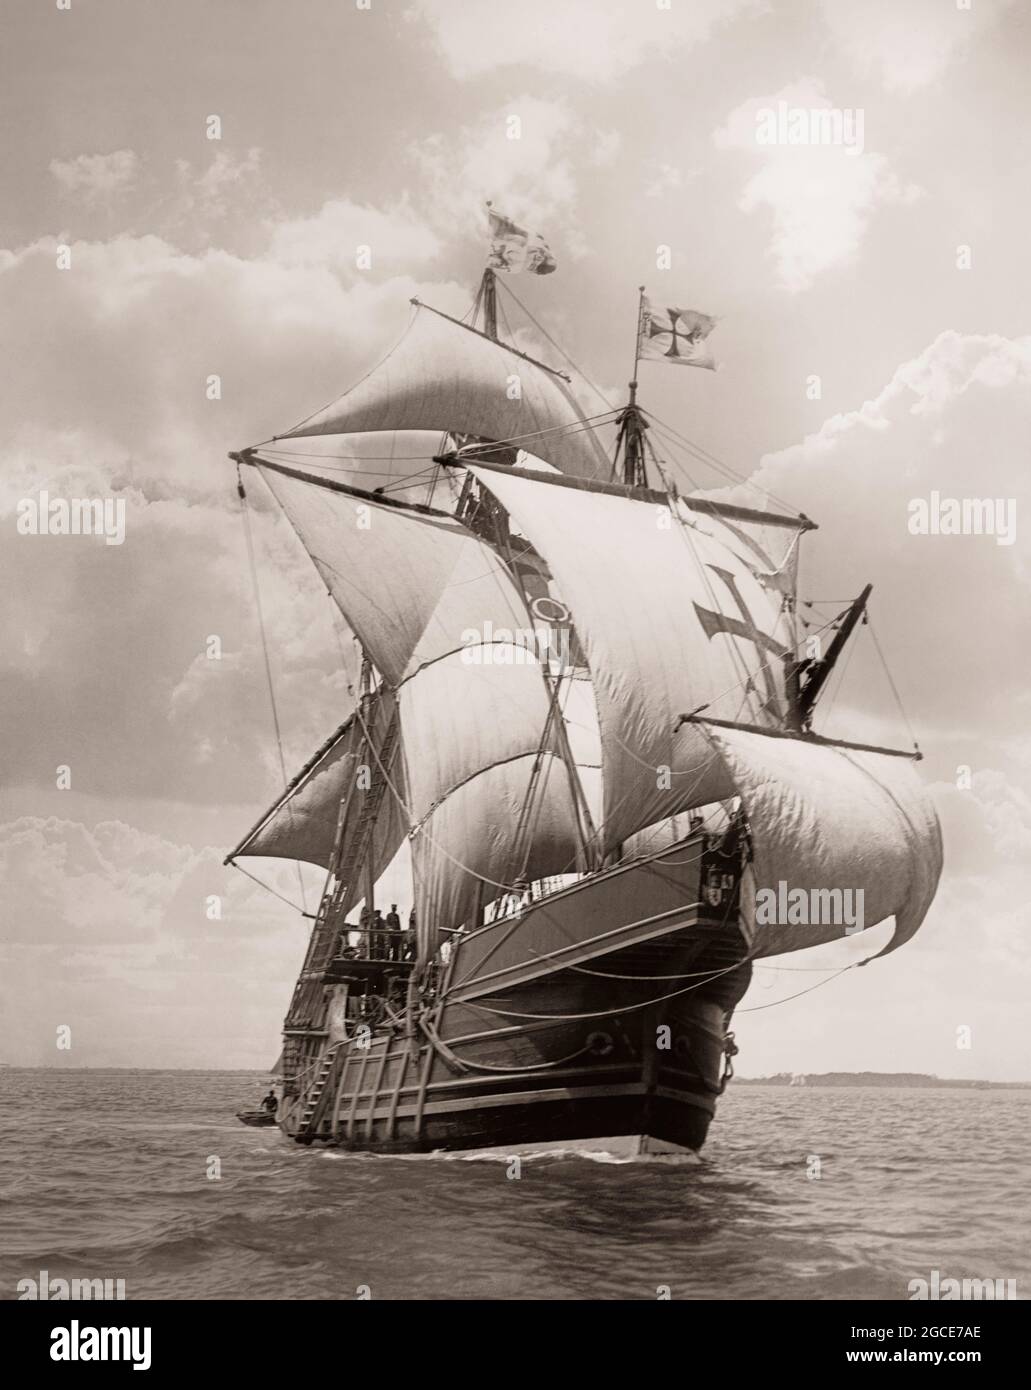 Replica of the Spanish caravel Santa Maria, used by Christopher Columbus in his first voyage across the Atlantic Ocean in 1492, digitally optimized Stock Photo